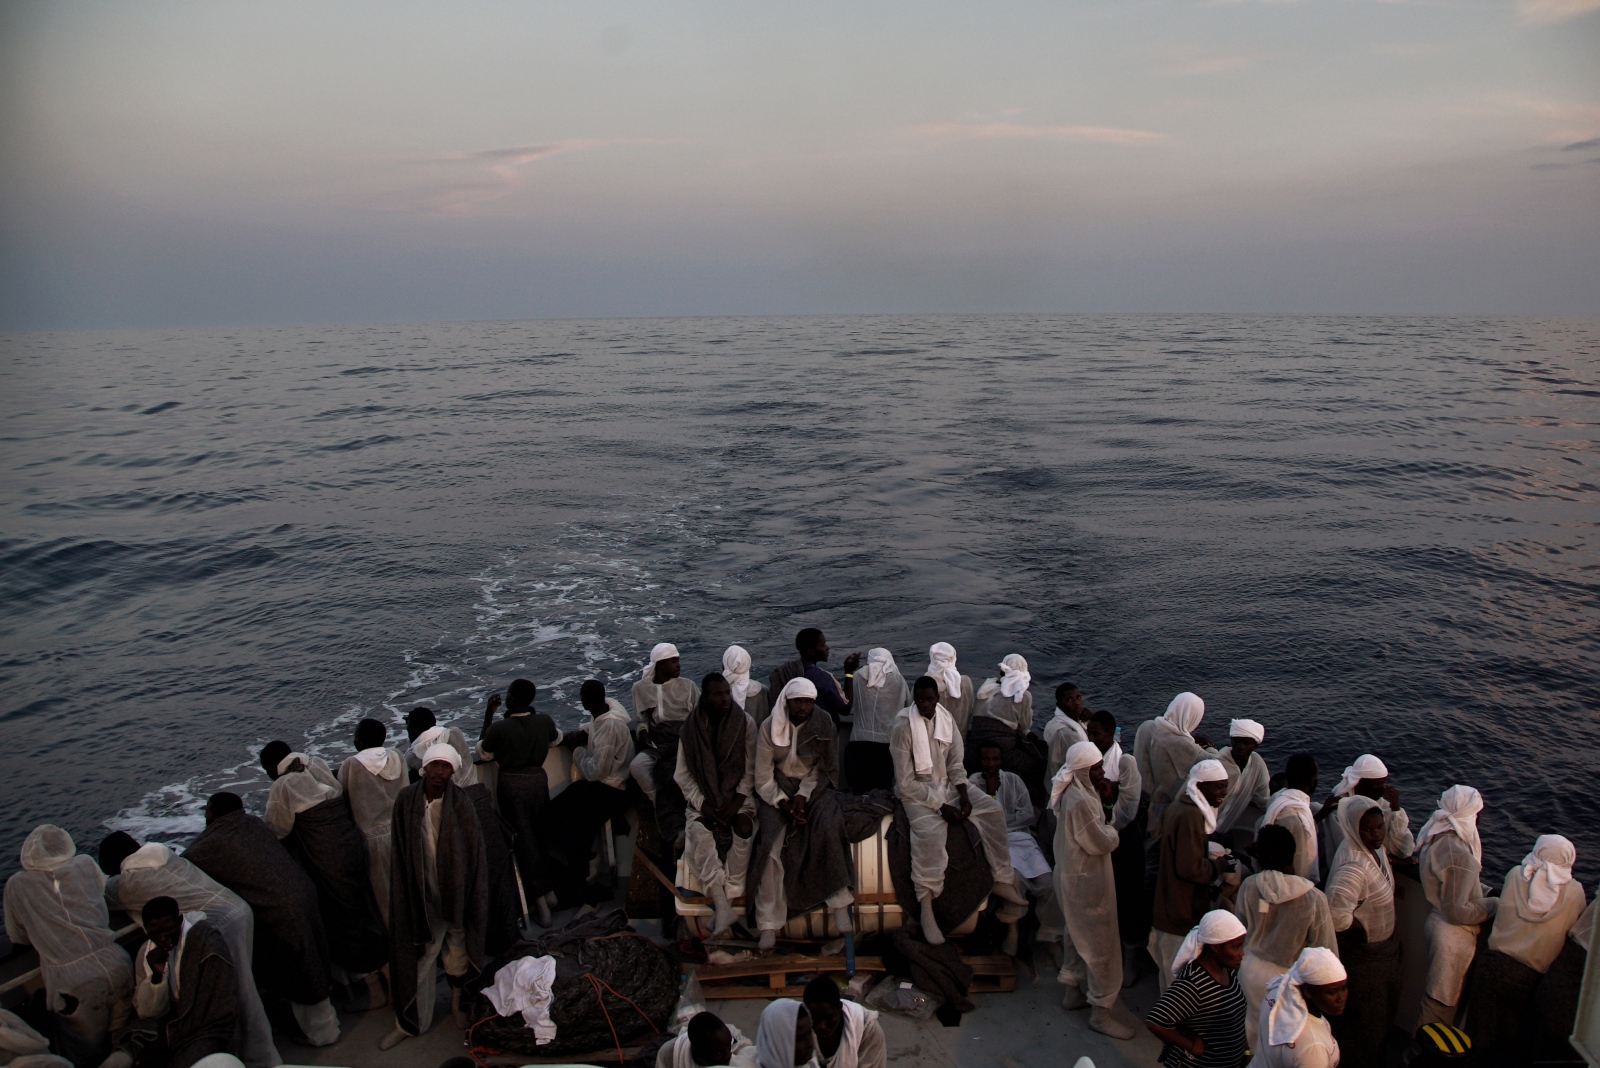 Migrants look out from the stern of the &#39;Aquarius&#39; vessel, on the Mediterranean Sea, with more than 600 migrants aboard the ship rescued by SOS Mediterranee and the medical aid group Medecins Sans Frontieres (MSF).